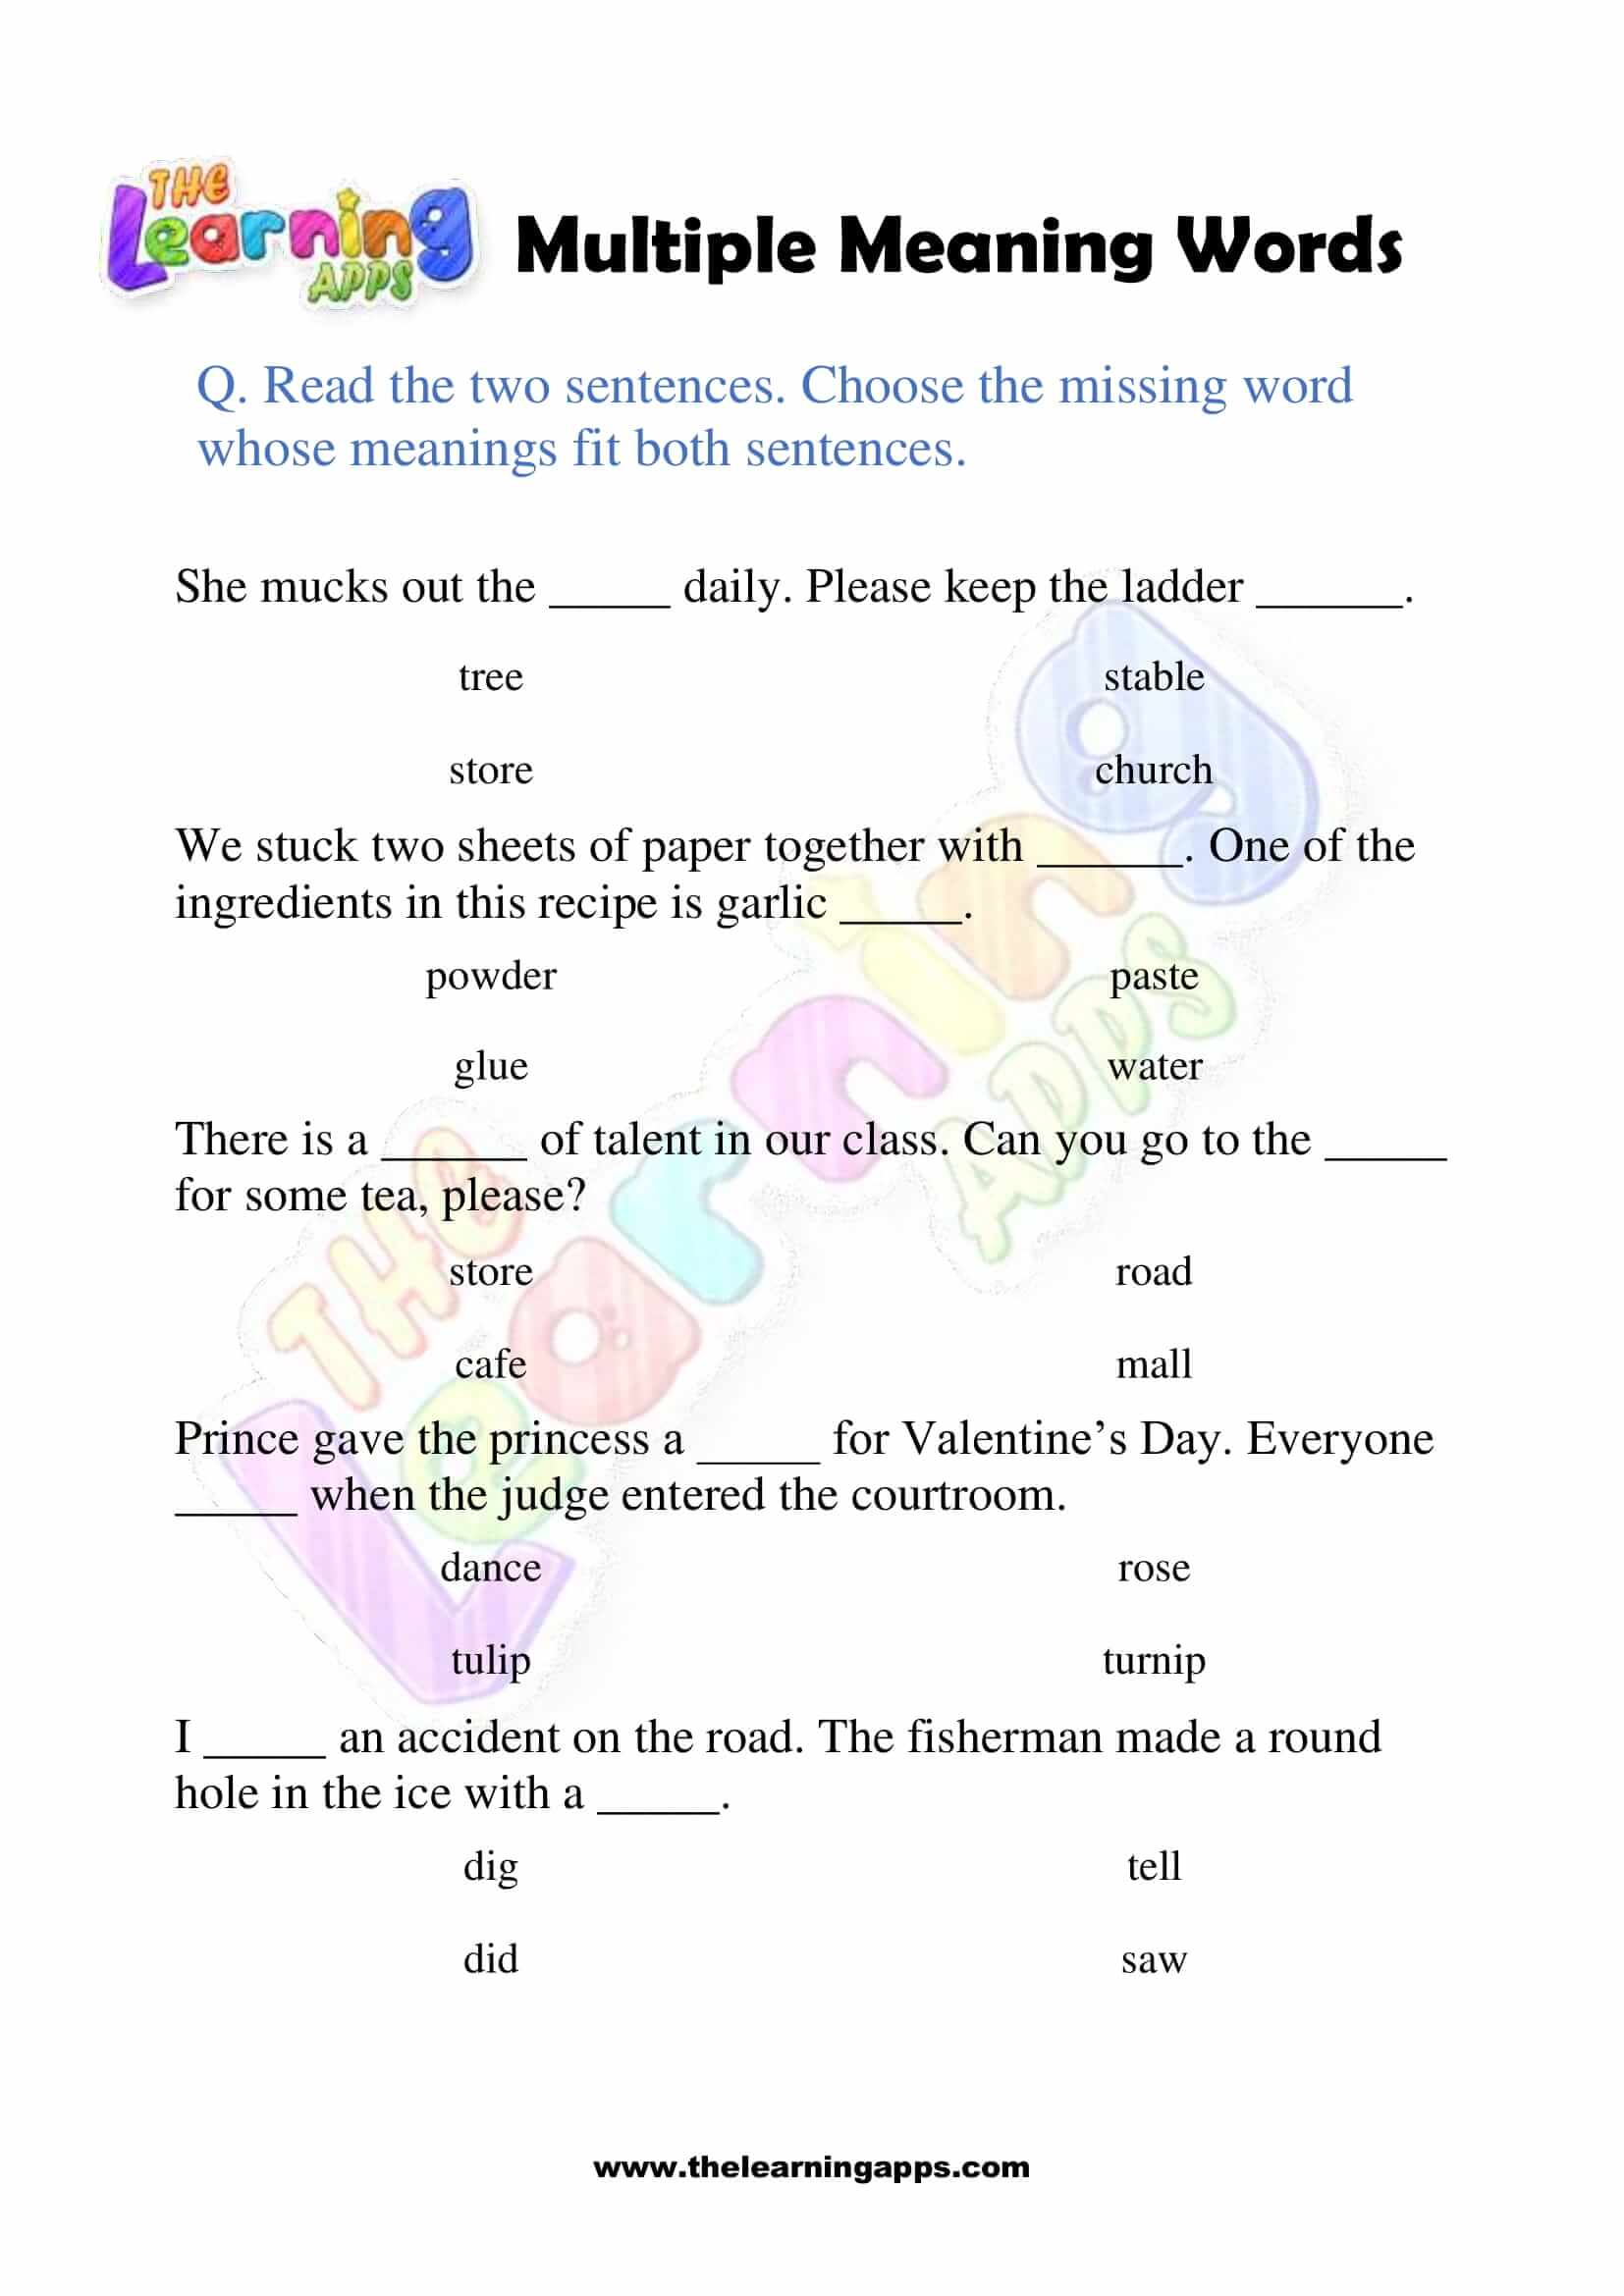 Multiple Meaning Words - Grade 3 - Activity 5